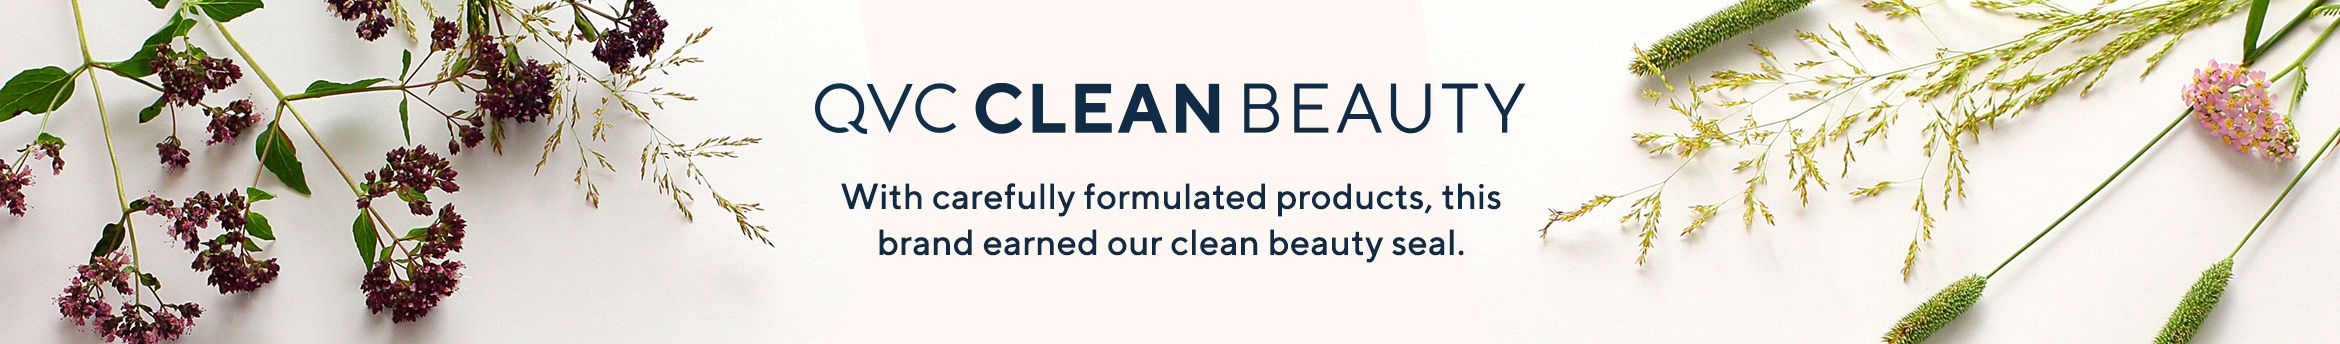 QVC® Clean Beauty - With carefully formulated products, this brand earned our clean beauty seal.